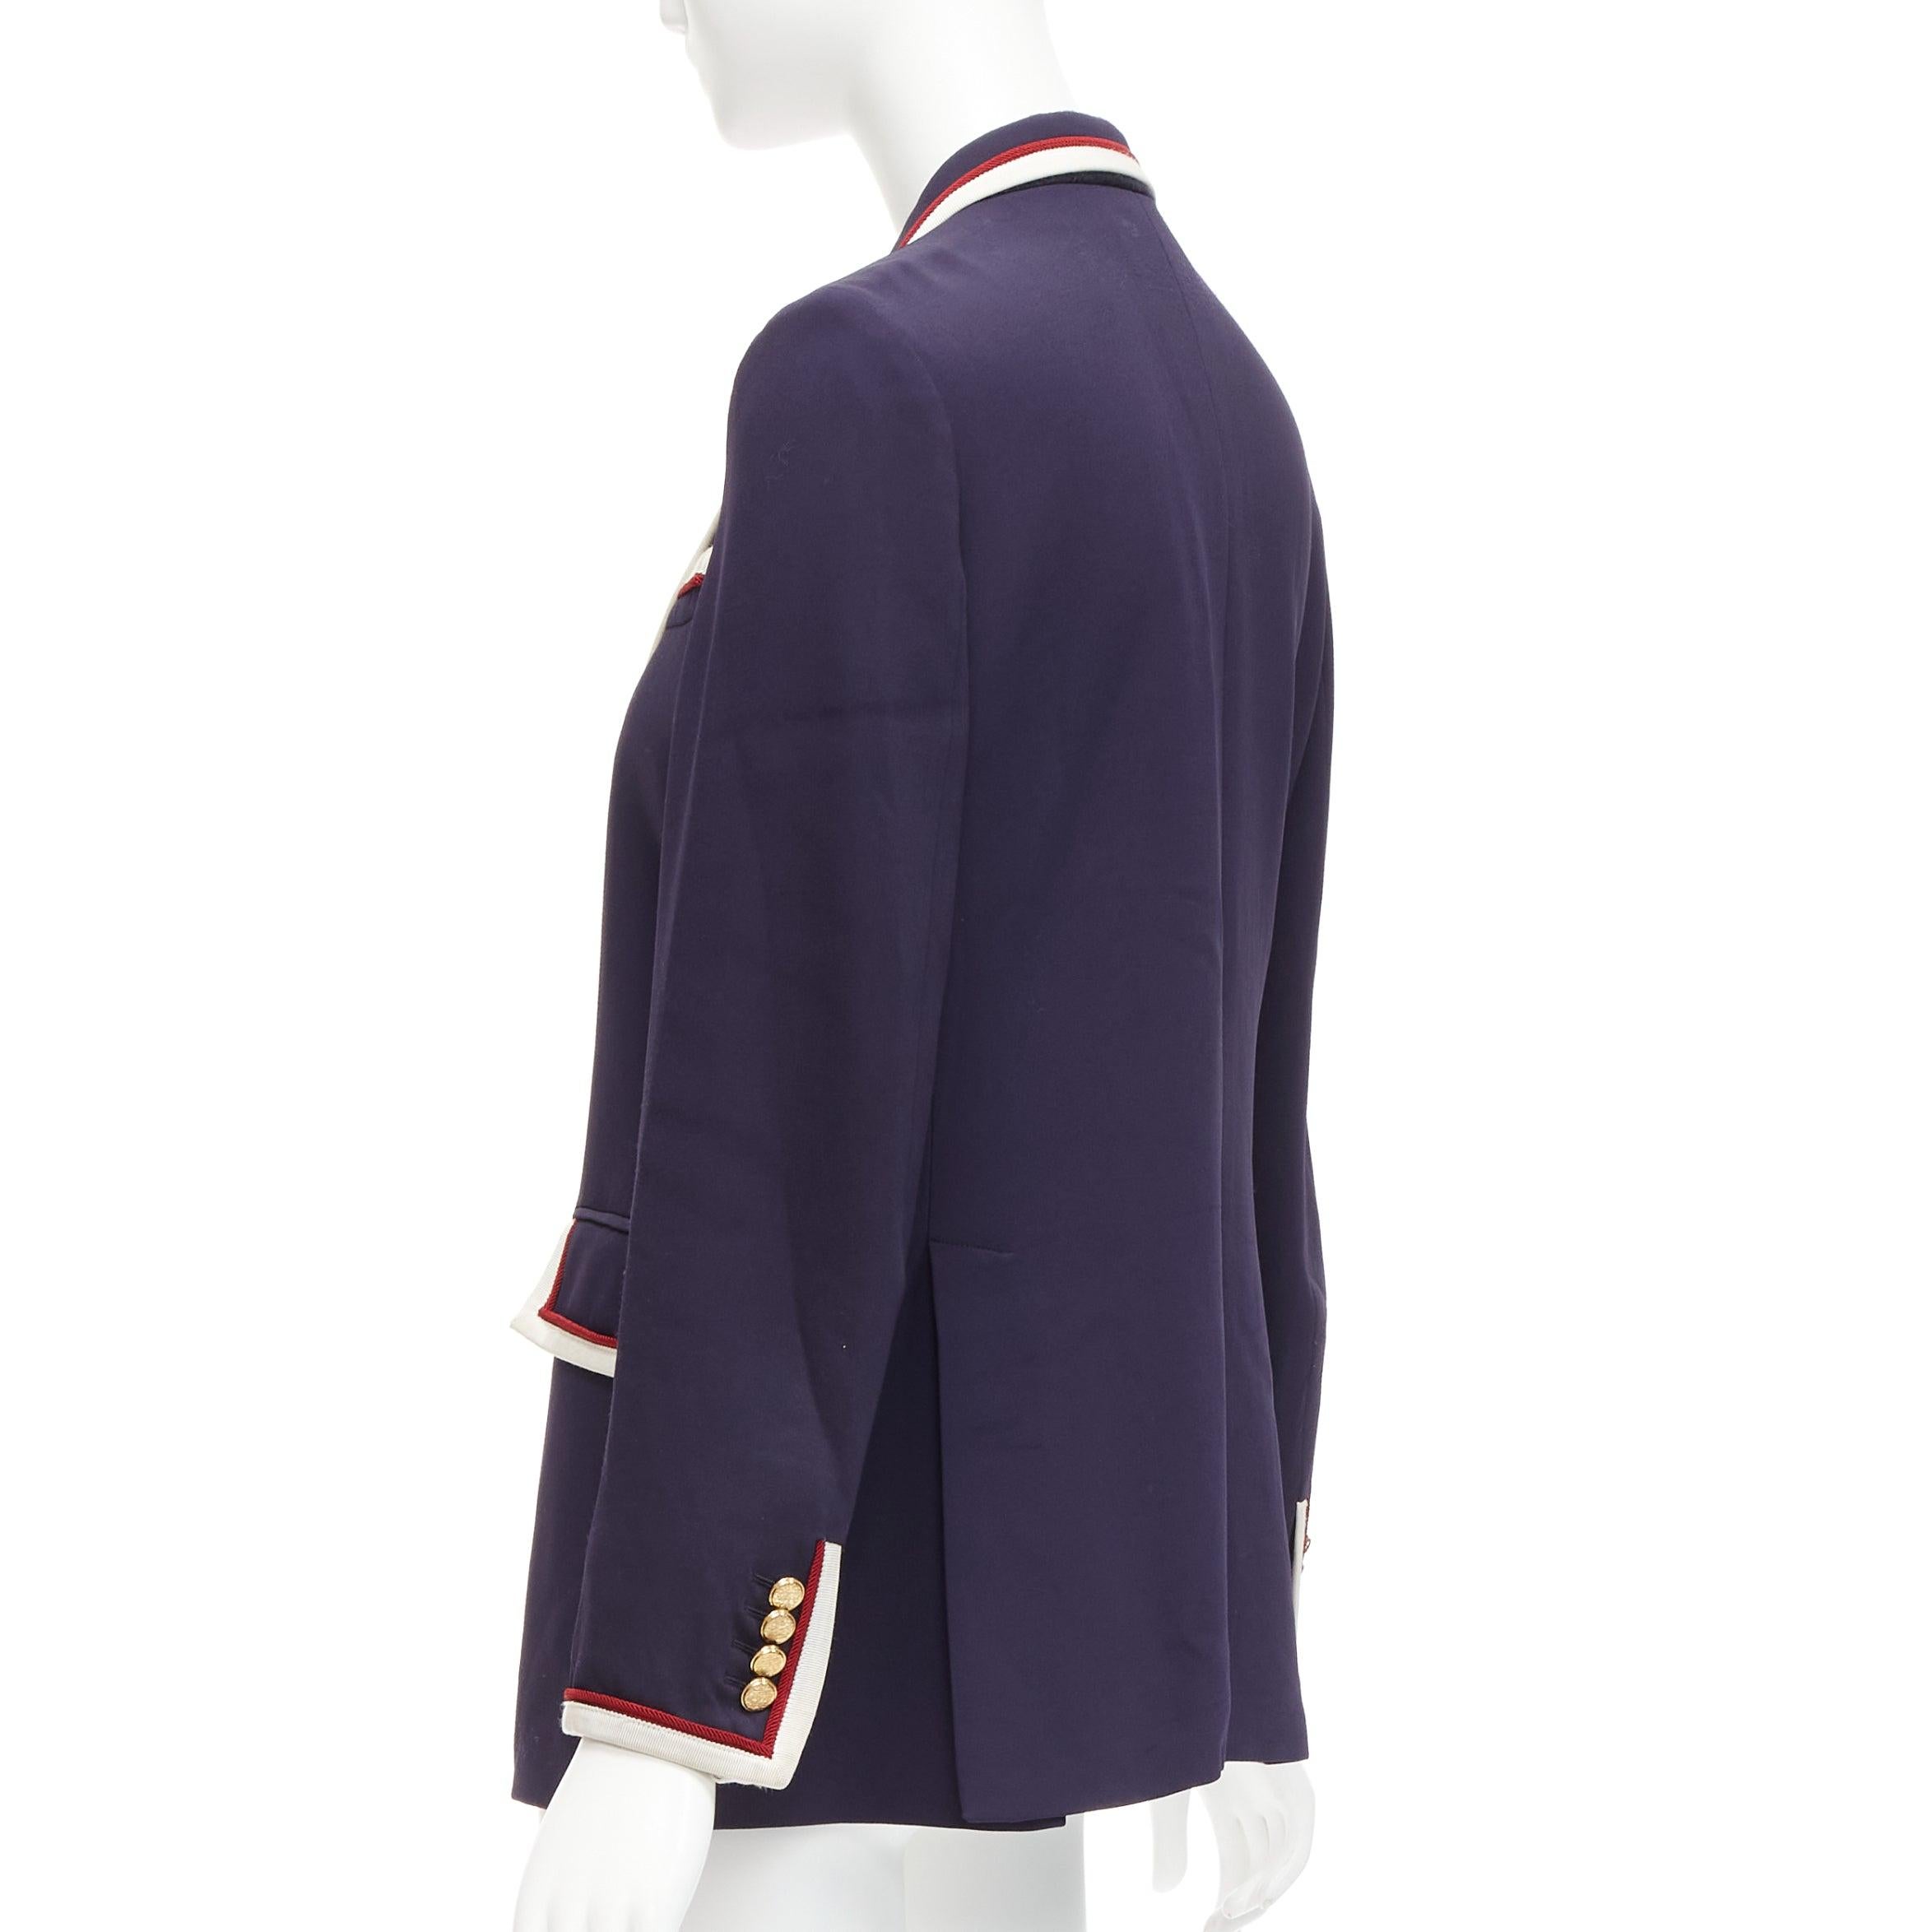 GUCCI Alessandro Michele 2019 navy trimmed GG printed lining blazer IT44 L For Sale 3